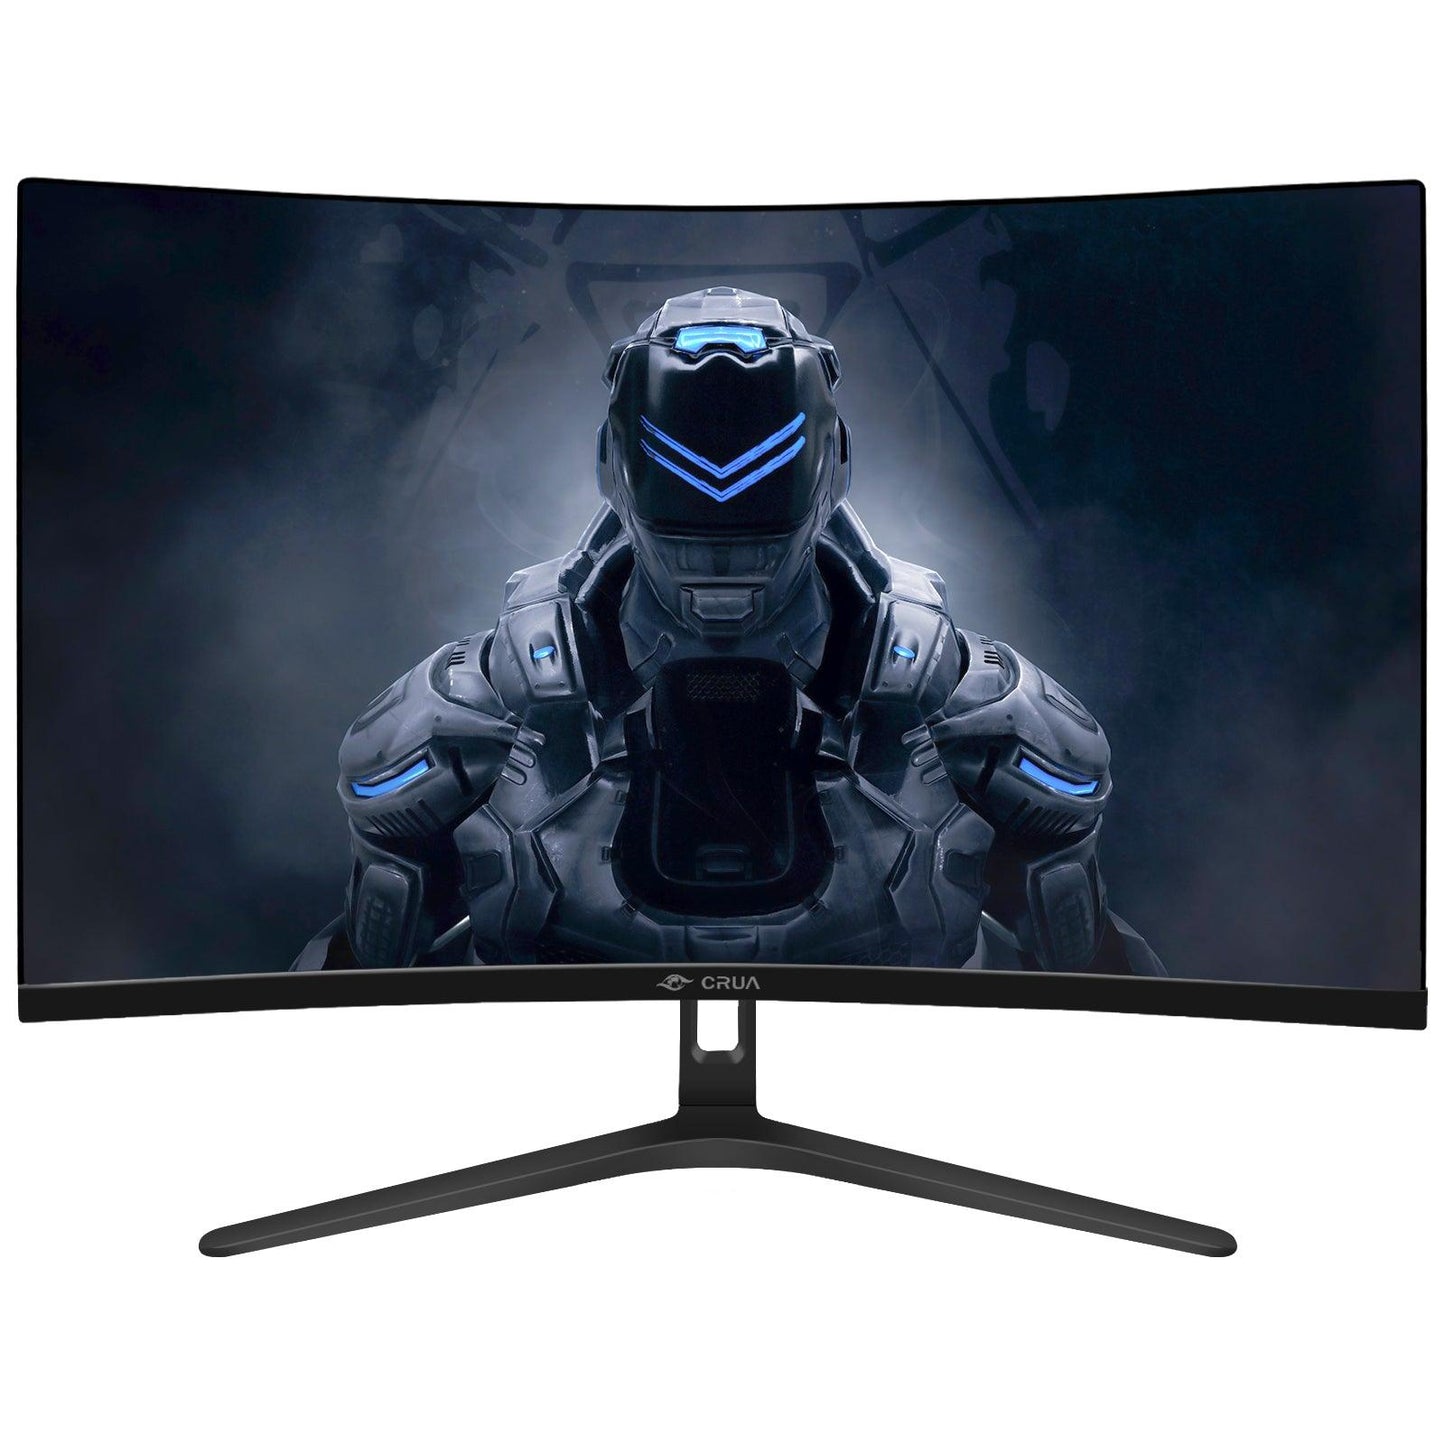 Load image into Gallery viewer, Built for eSports, there is no doubt that this is the best eSports monitor
